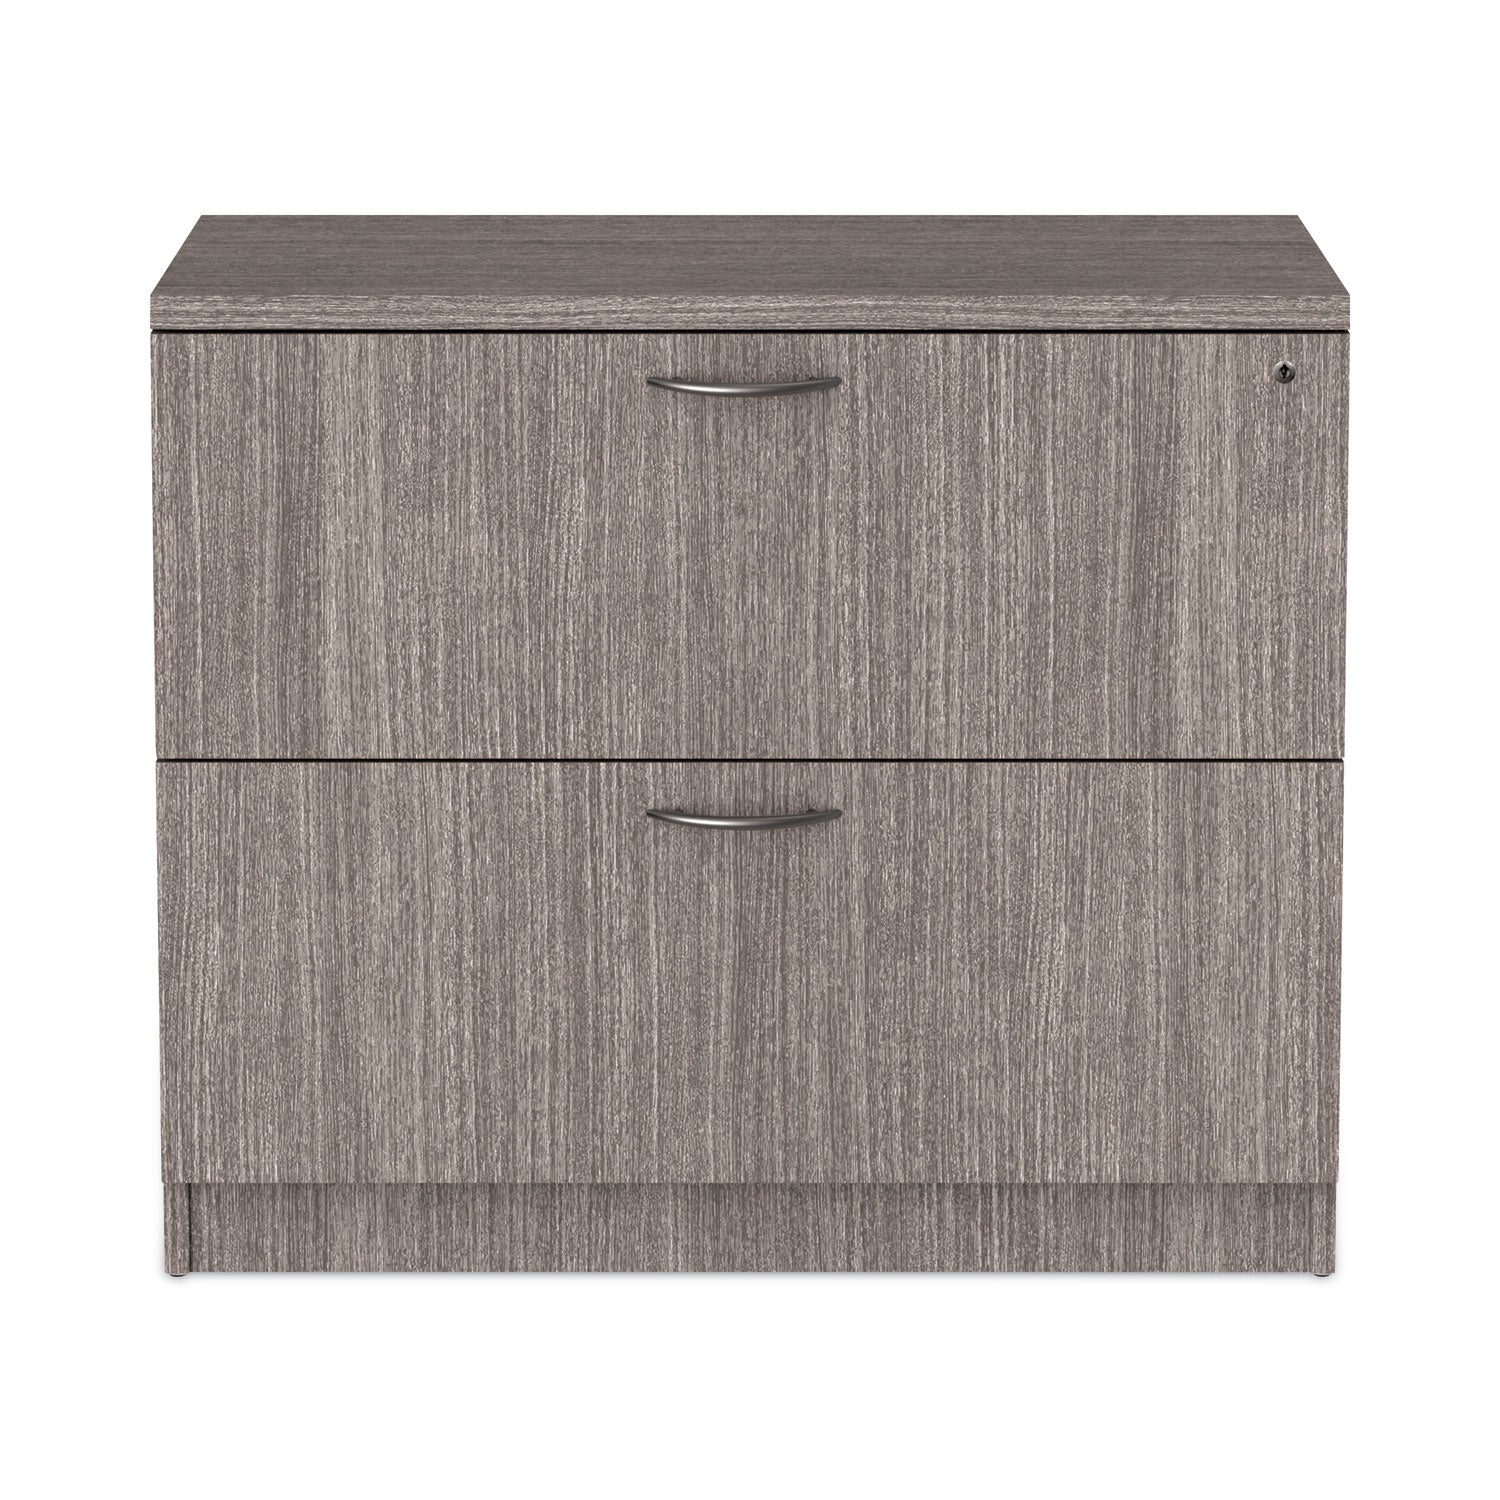 alera-valencia-series-lateral-file-2-legal-letter-size-file-drawers-gray-34-x-2275-x-295_aleva513622gy - 1